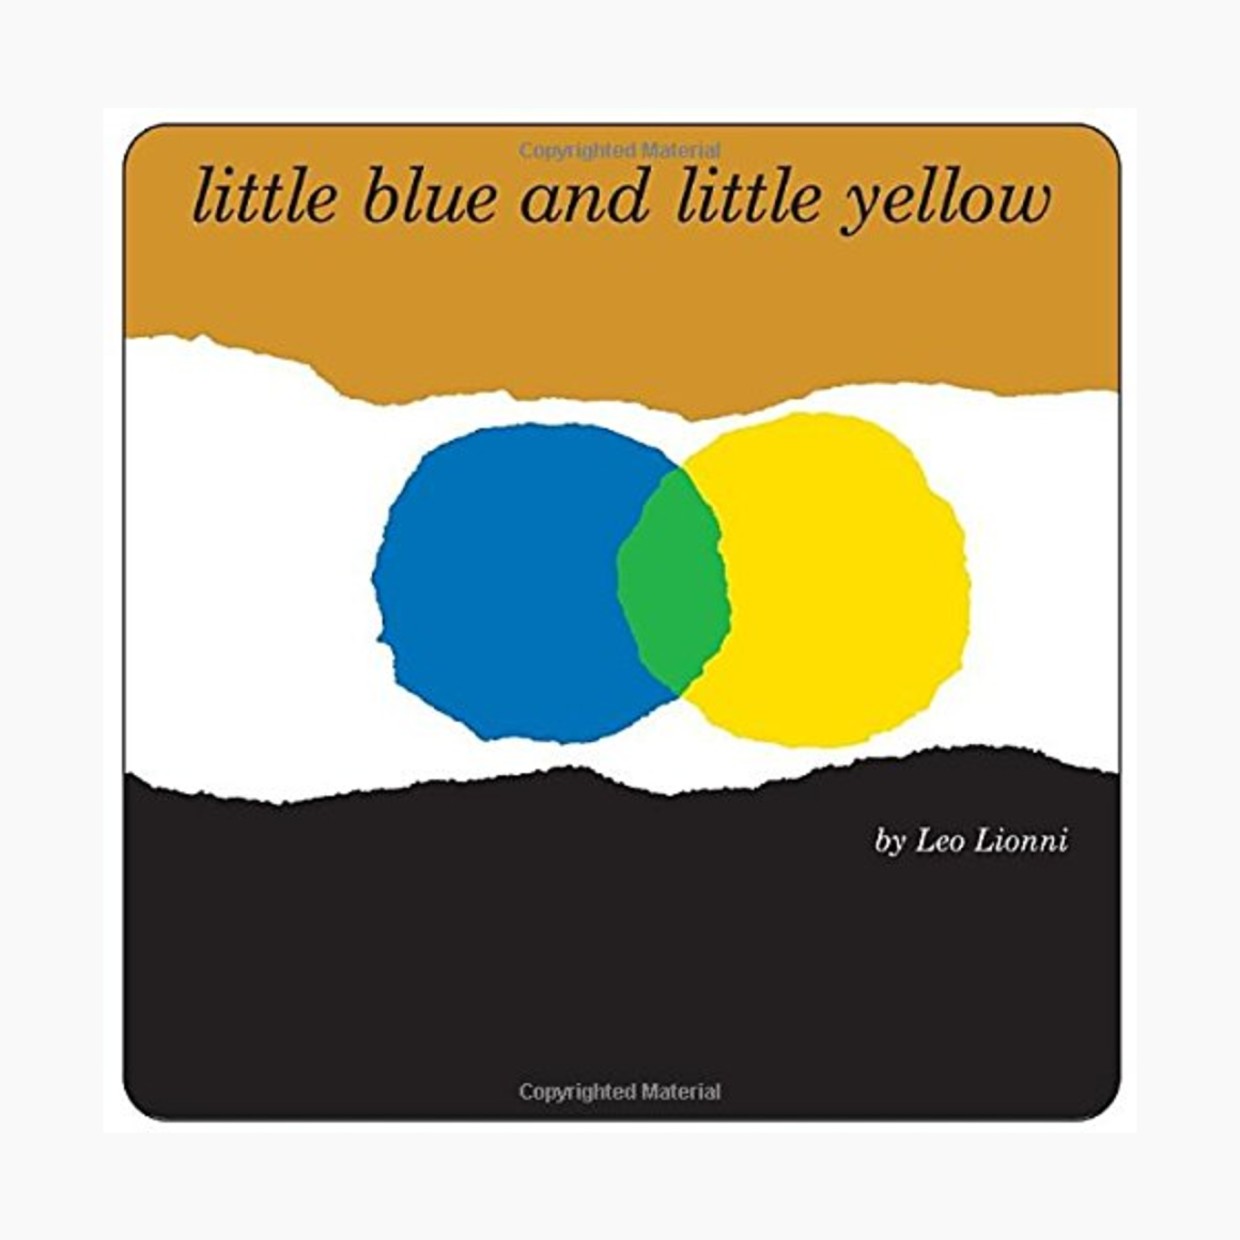 Little Blue and Little Yellow.